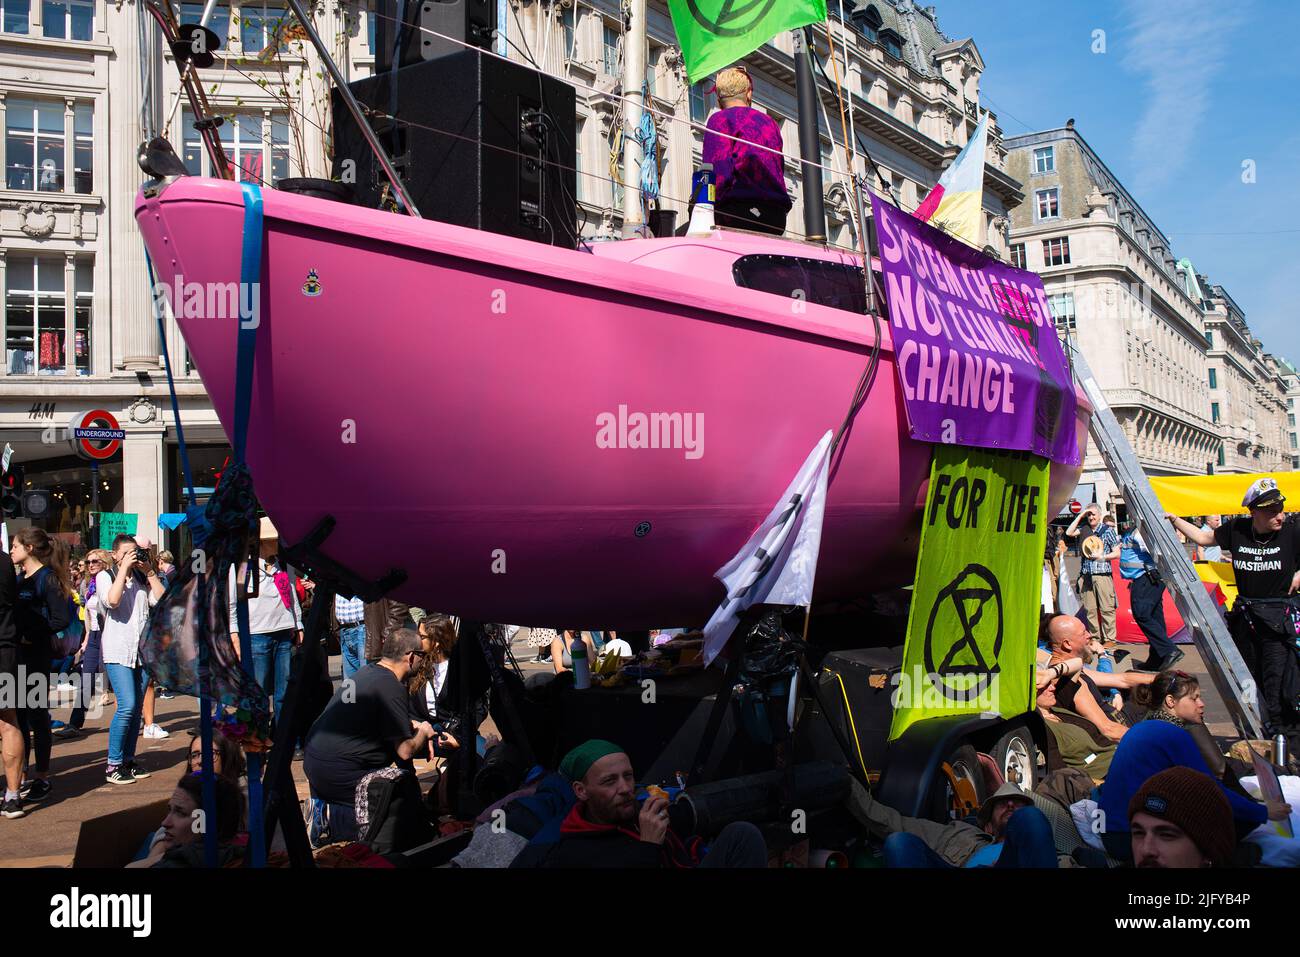 Climate change protesters at the Extinction Rebellion demonstration, central London, in protest of world climate breakdown and ecological collapse. Stock Photo